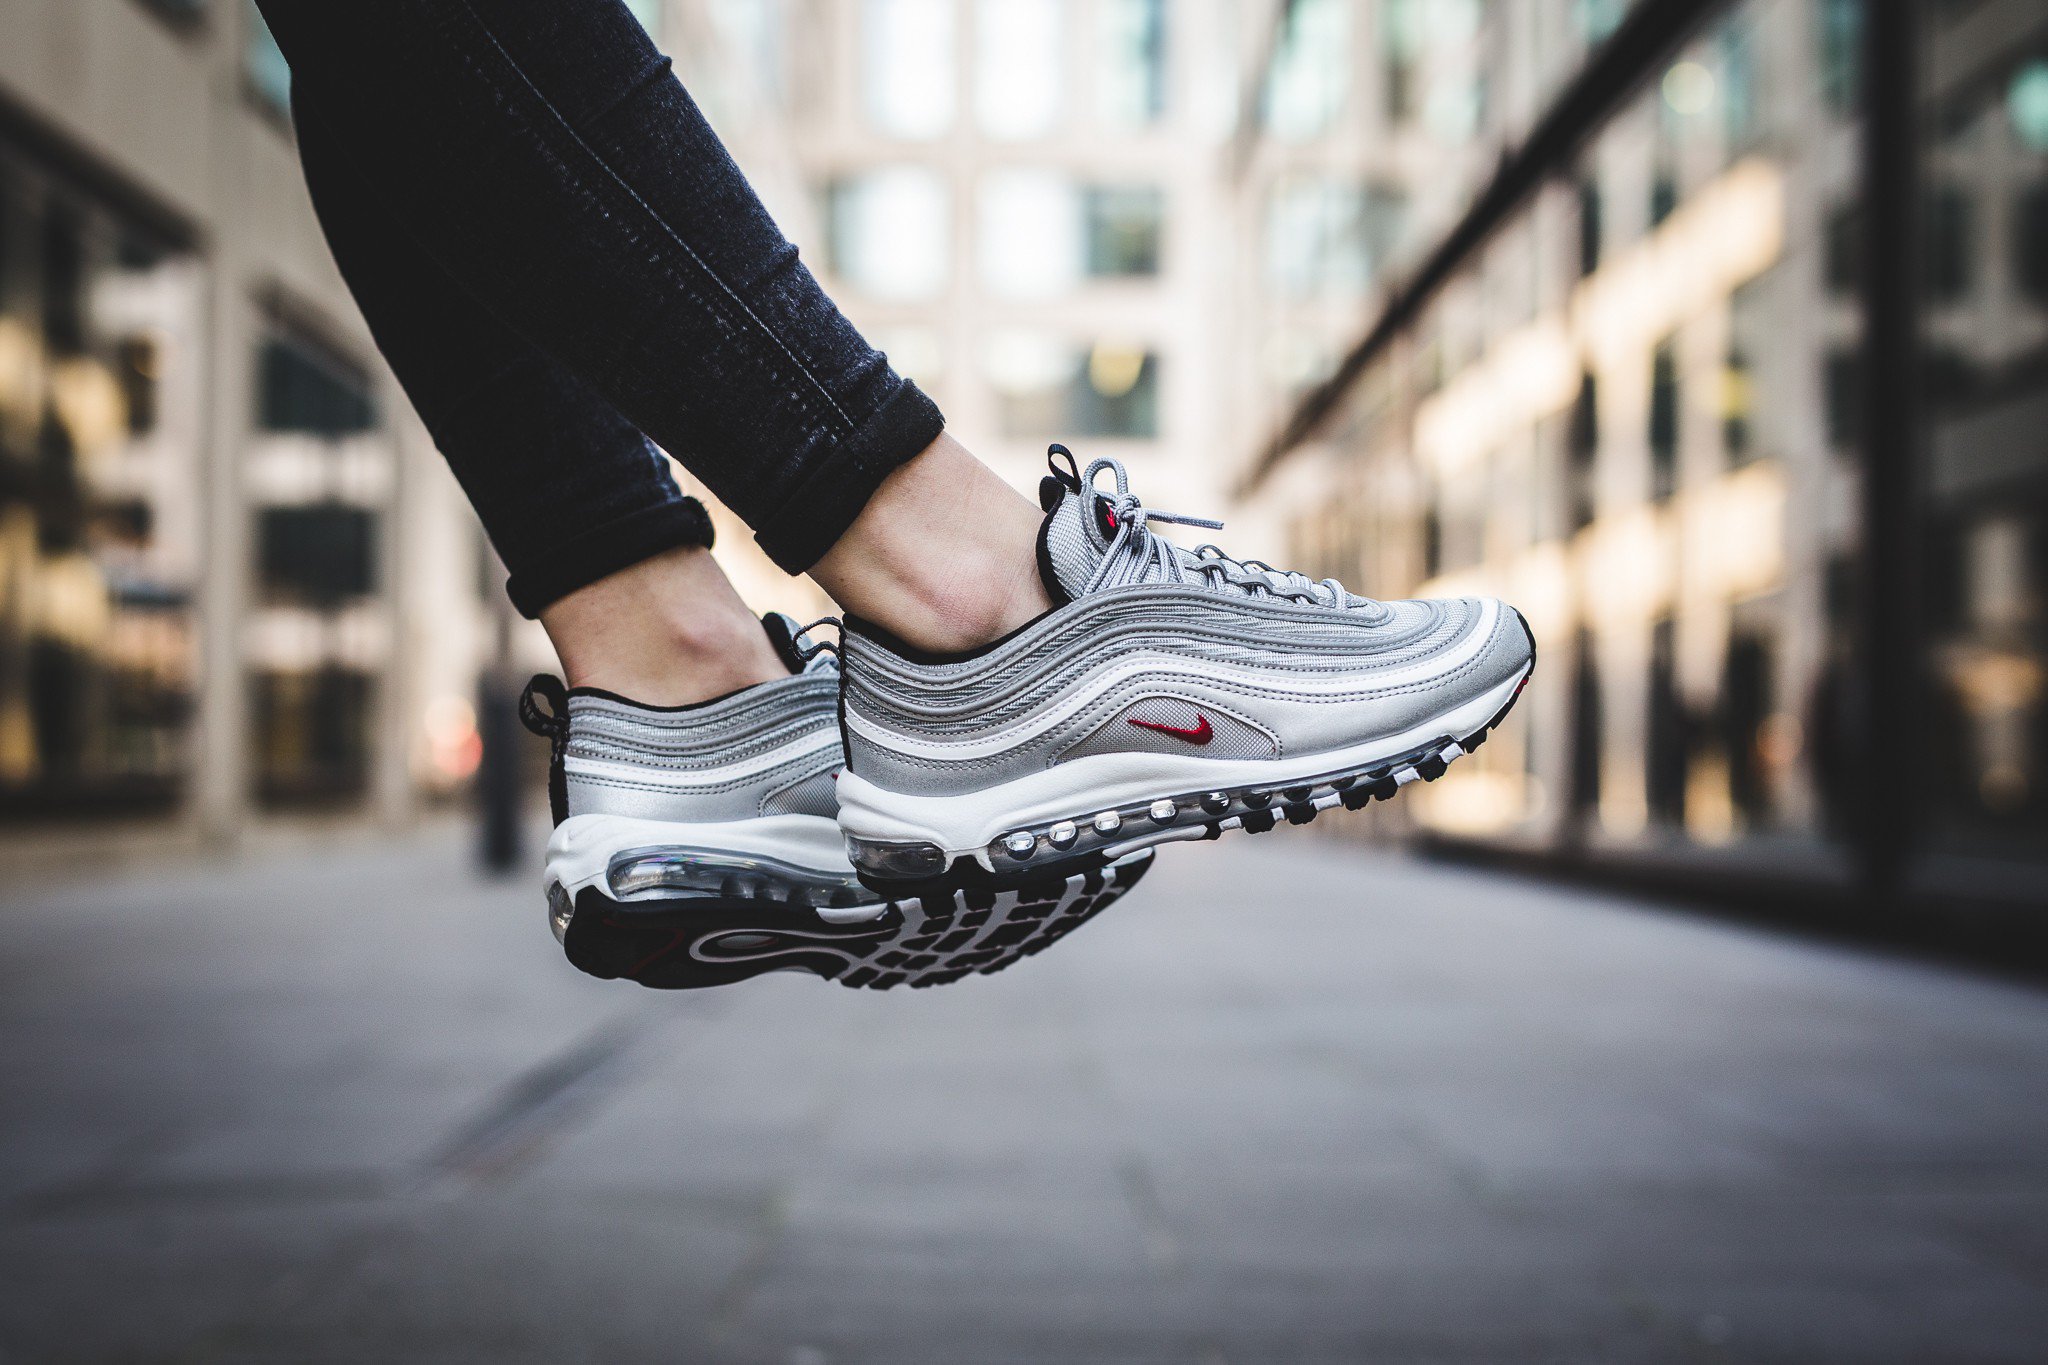 The Supplier Twitter: "Nike Air Max 97 Womens Bullet. Use code VIPDEAL25 for 25% off at Foot Locker UK Link &gt; https://t.co/wQCMpKYFEO https://t.co/GR7x29mrIS" / Twitter